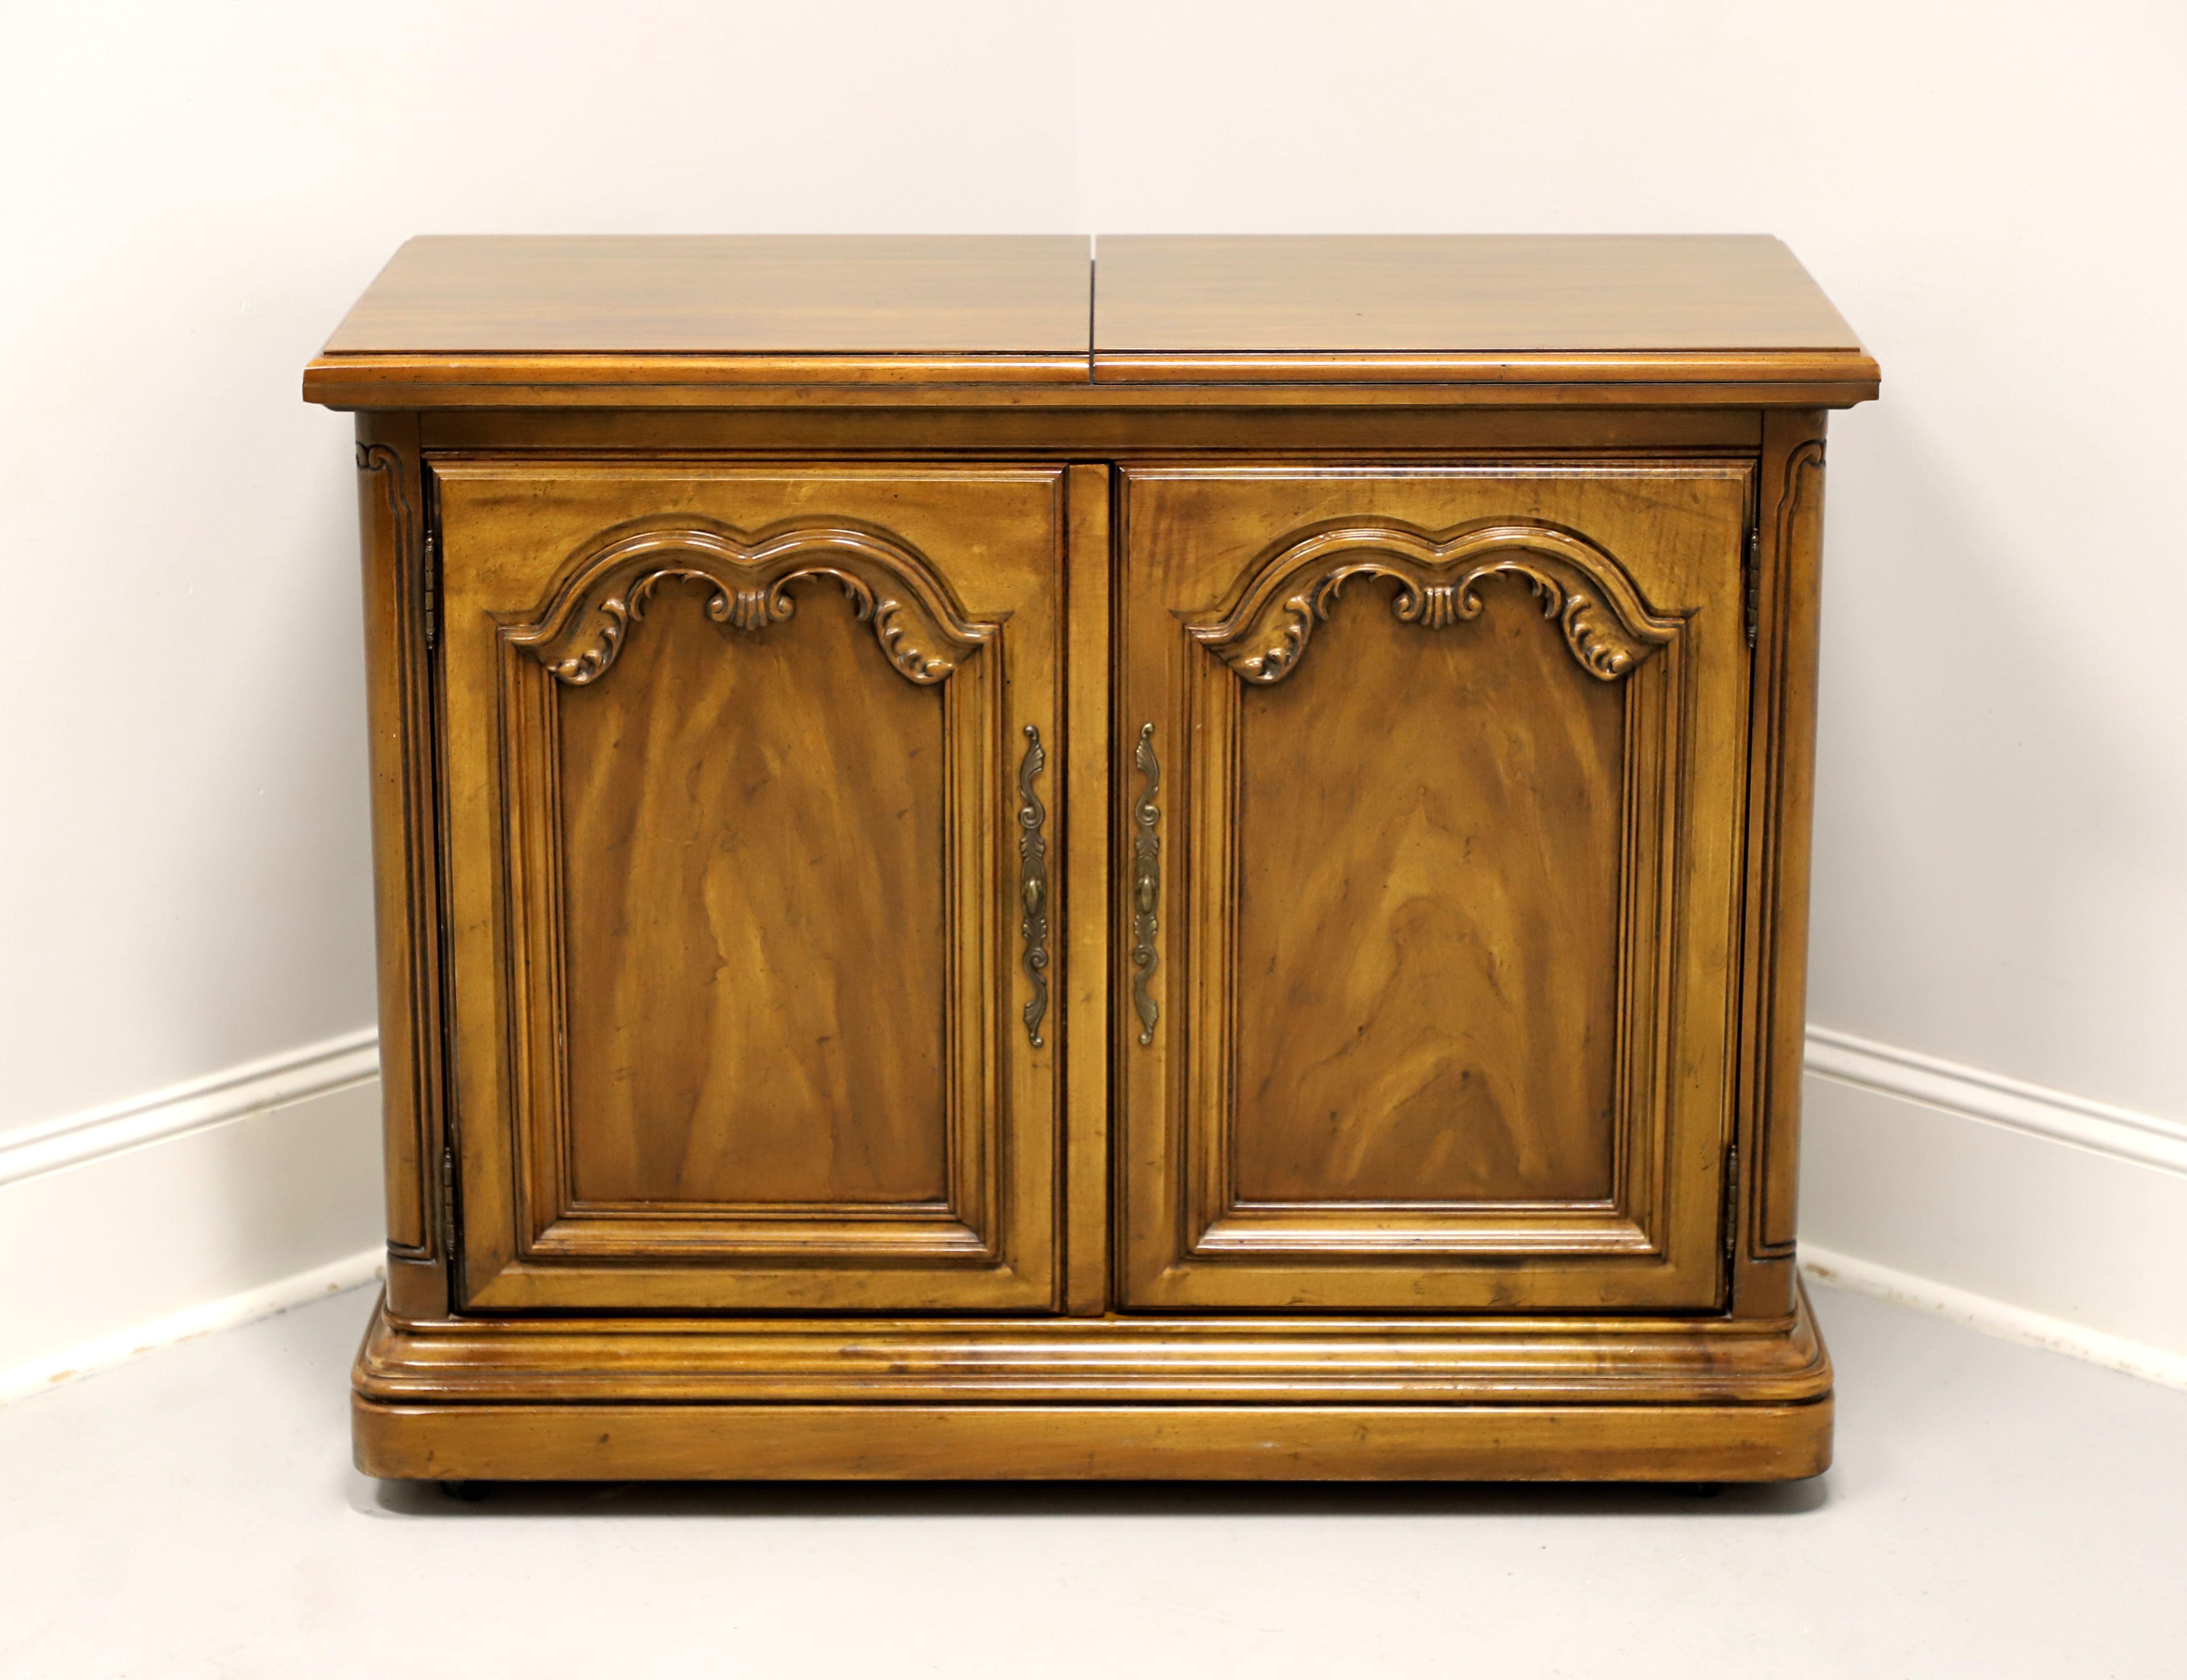 A flip top server in the French Country style by Drexel, from their Touraine II Collection. Pecan, or similar nutwood, brass hardware, bevel edge to top, composite surface under the flip out top, pull out side supports for flip out top, carved door